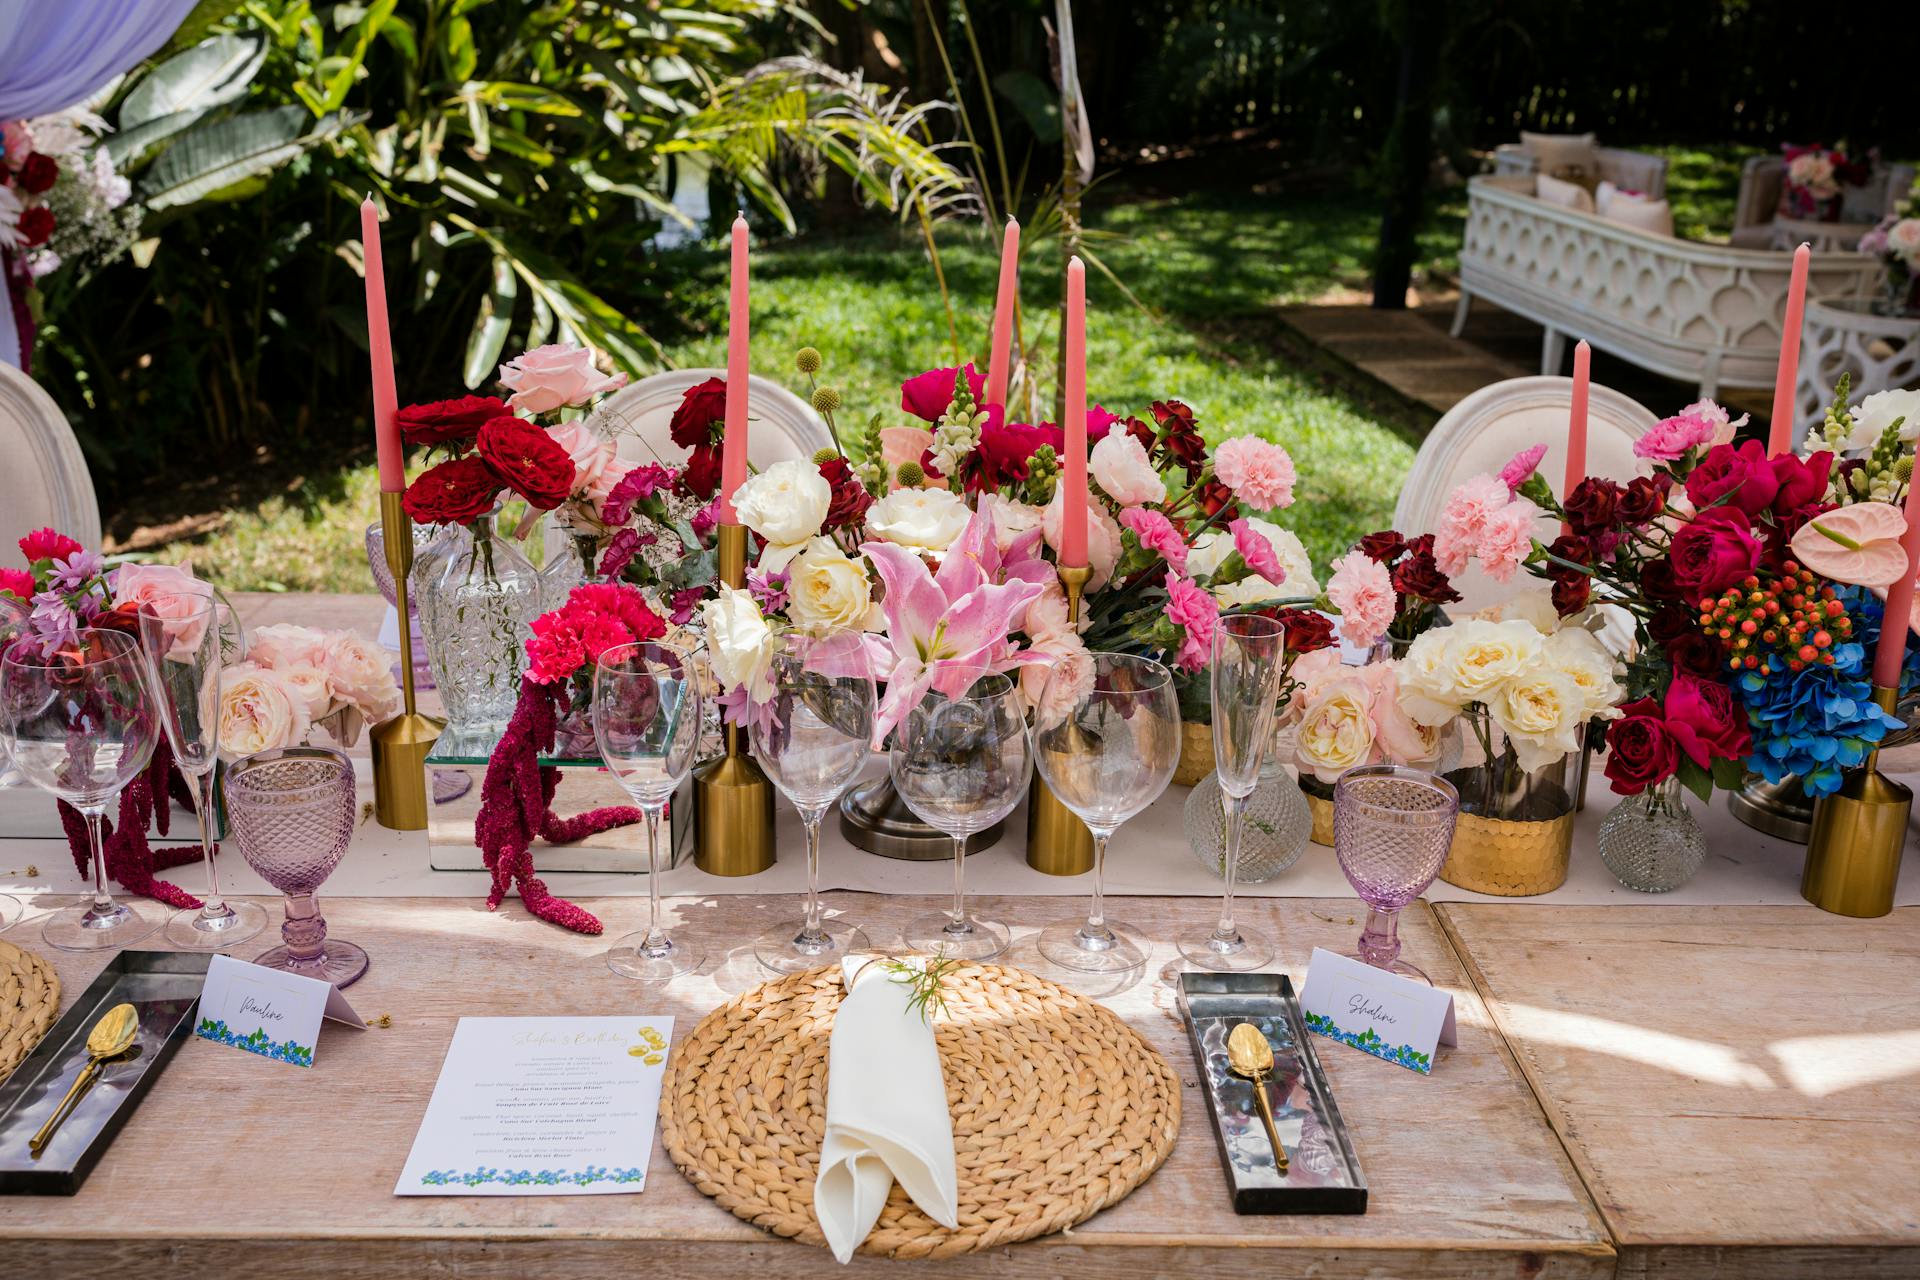 Party decorations on a table | Source: Pexels